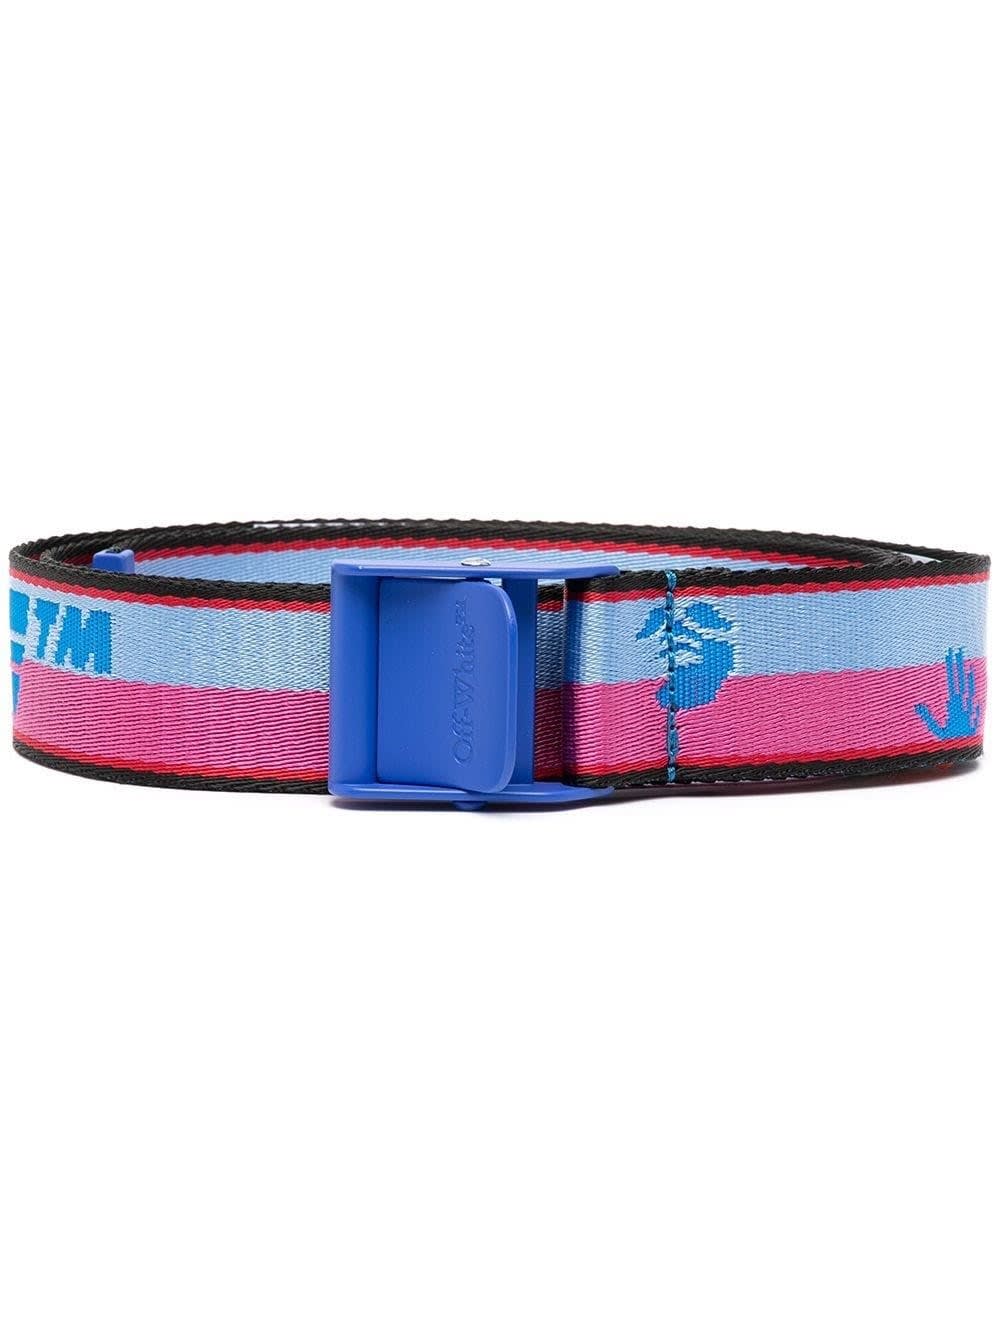 Off-White Classic Industrial Pink And Blue Belt